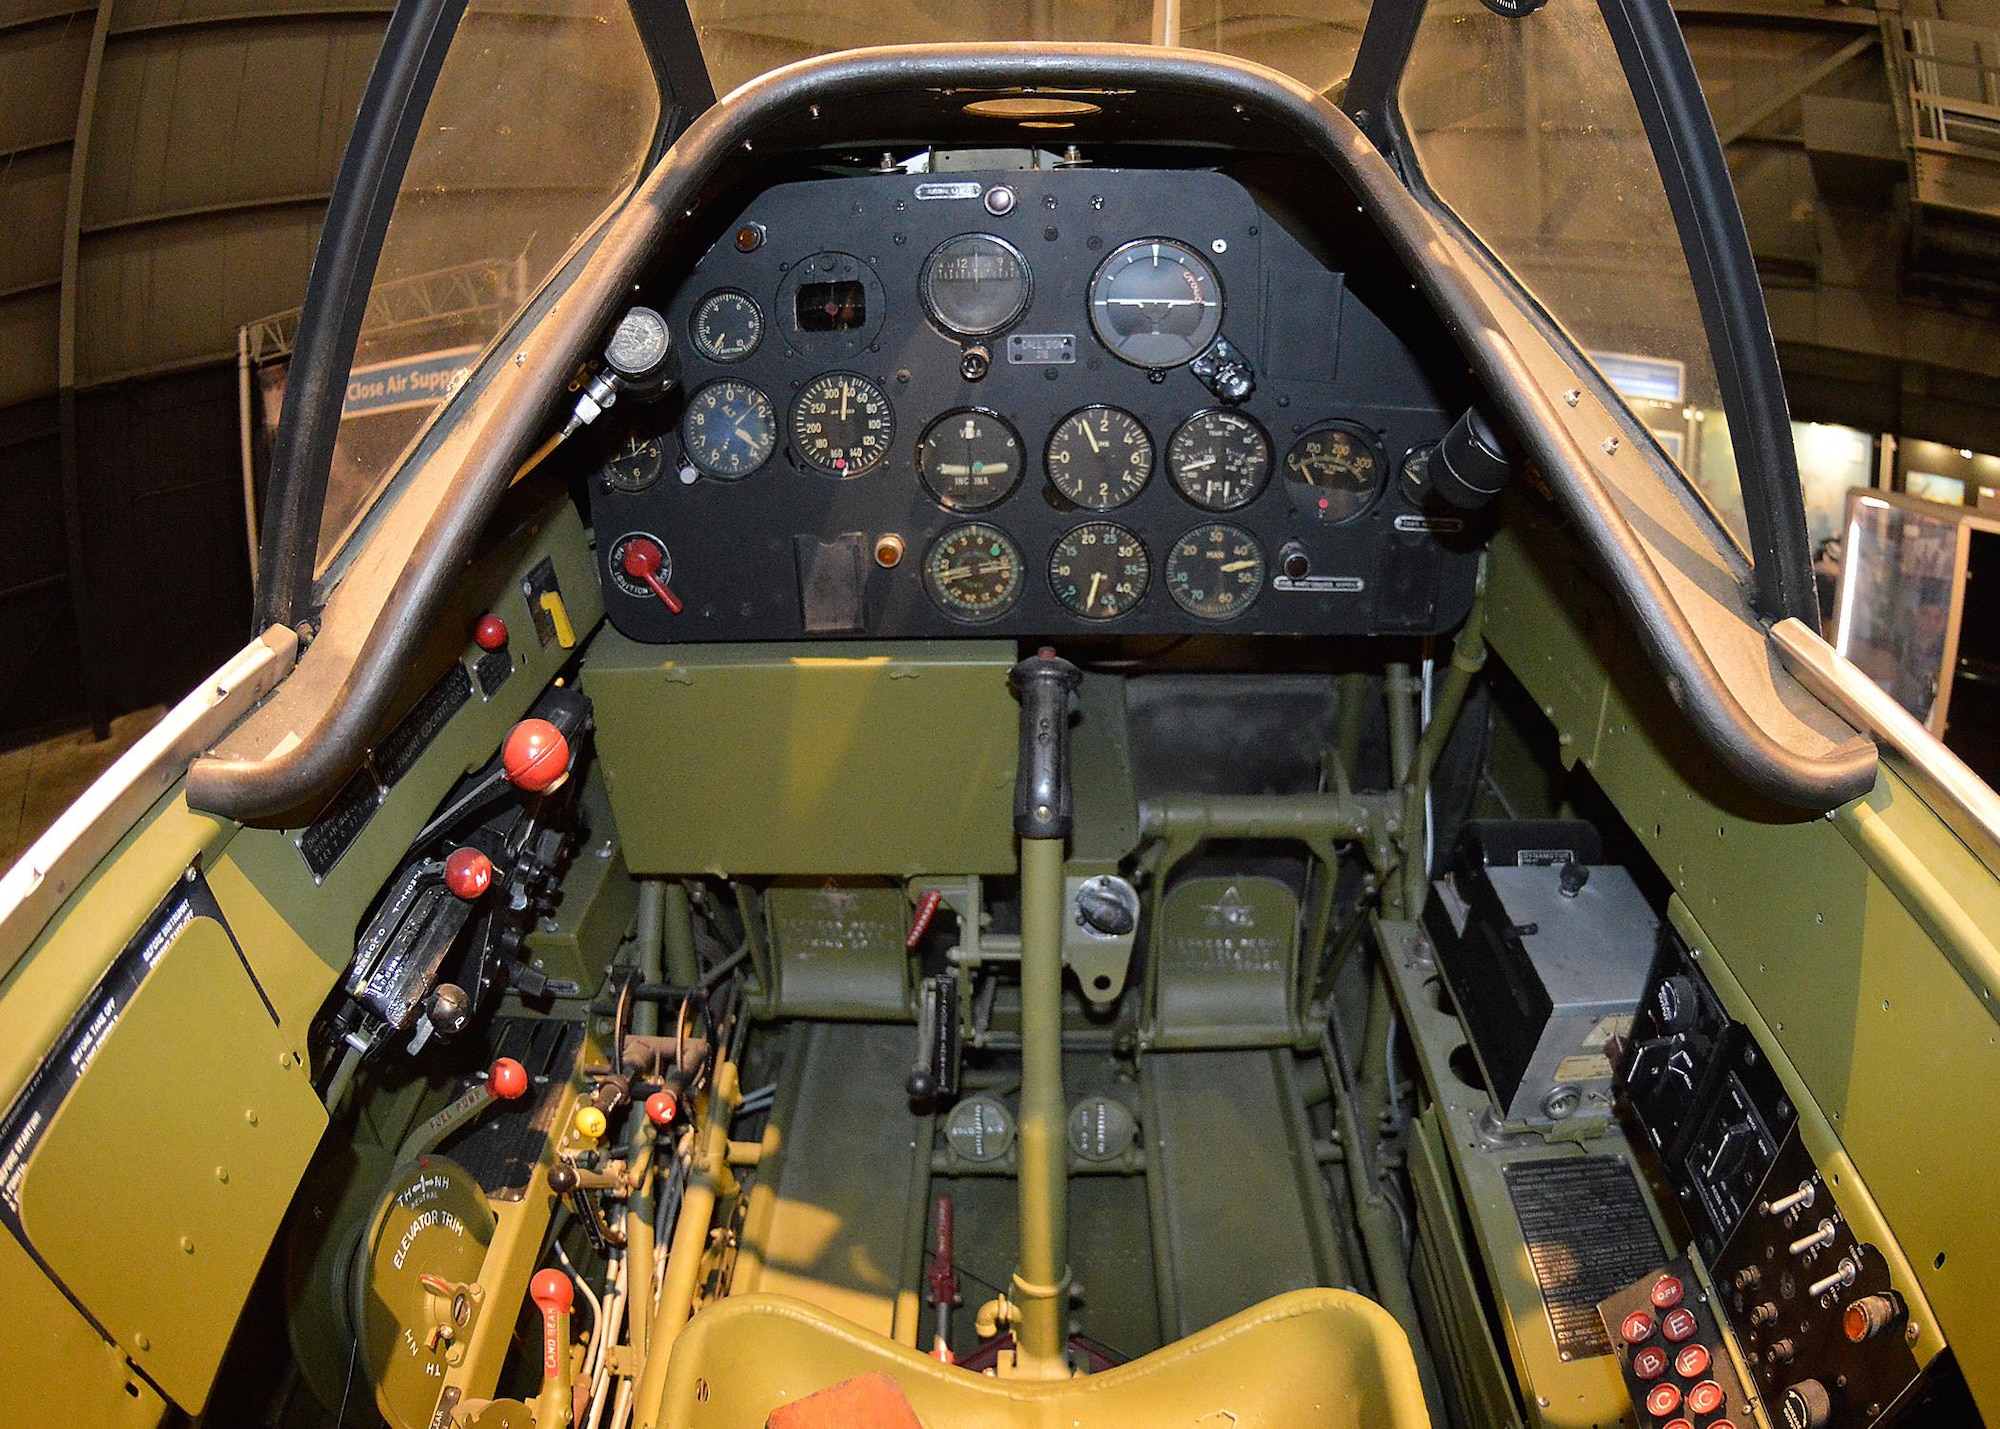 North American T-6D "Mosquito" front cockpit in the Korean War Gallery at the National Museum of the United States Air Force. (U.S. Air Force photo by Ken LaRock)